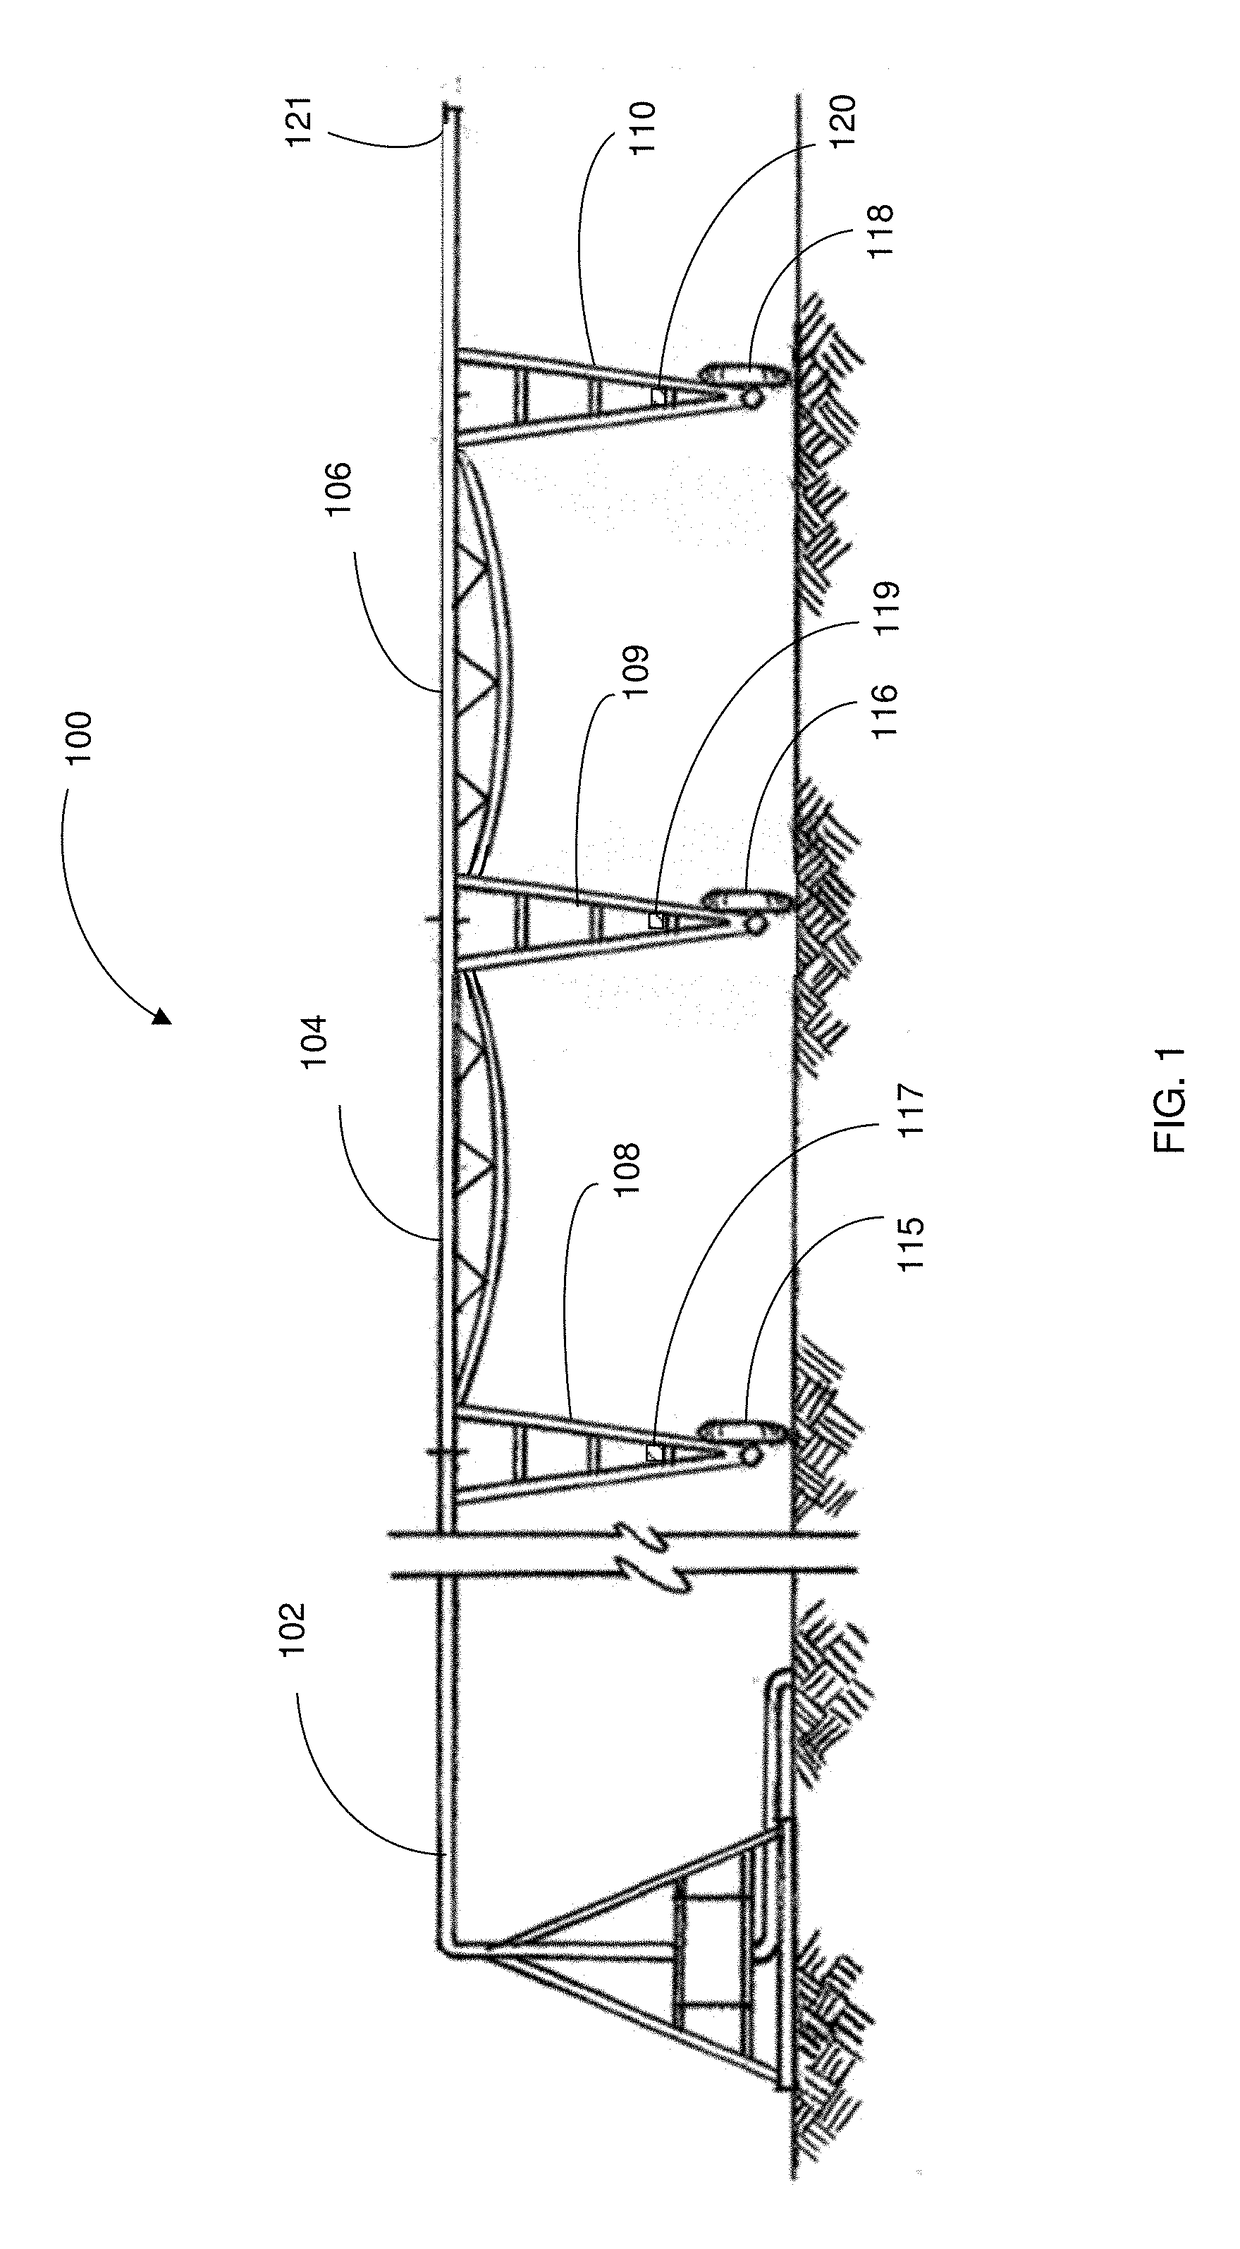 System and method for irrigation management using machine learning workflows